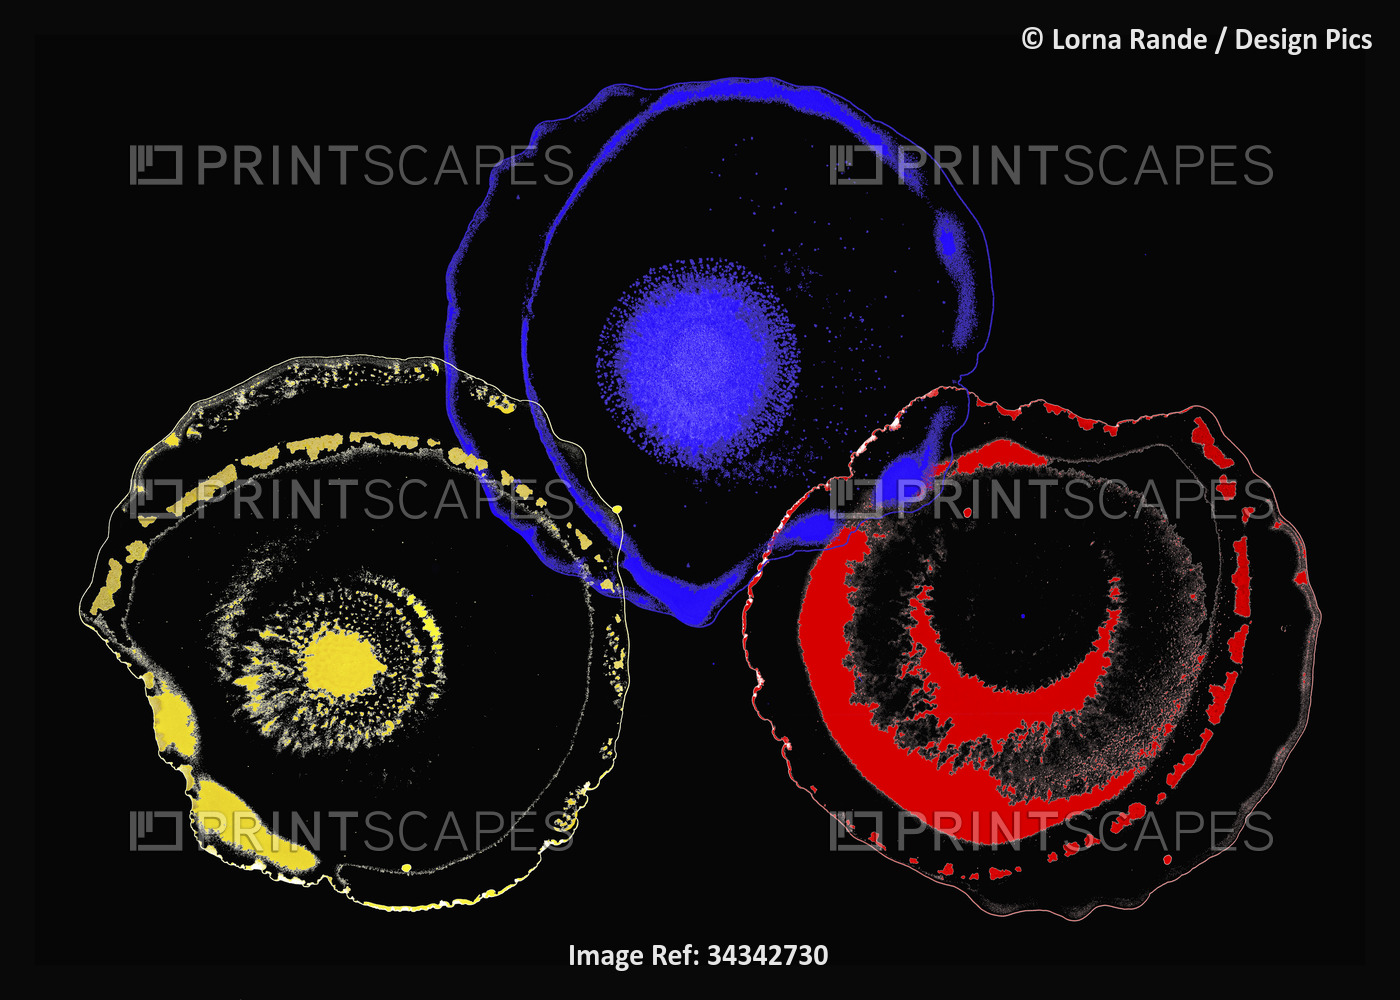 Ink blot creations in red, blue and yellow on a black background; Artwork